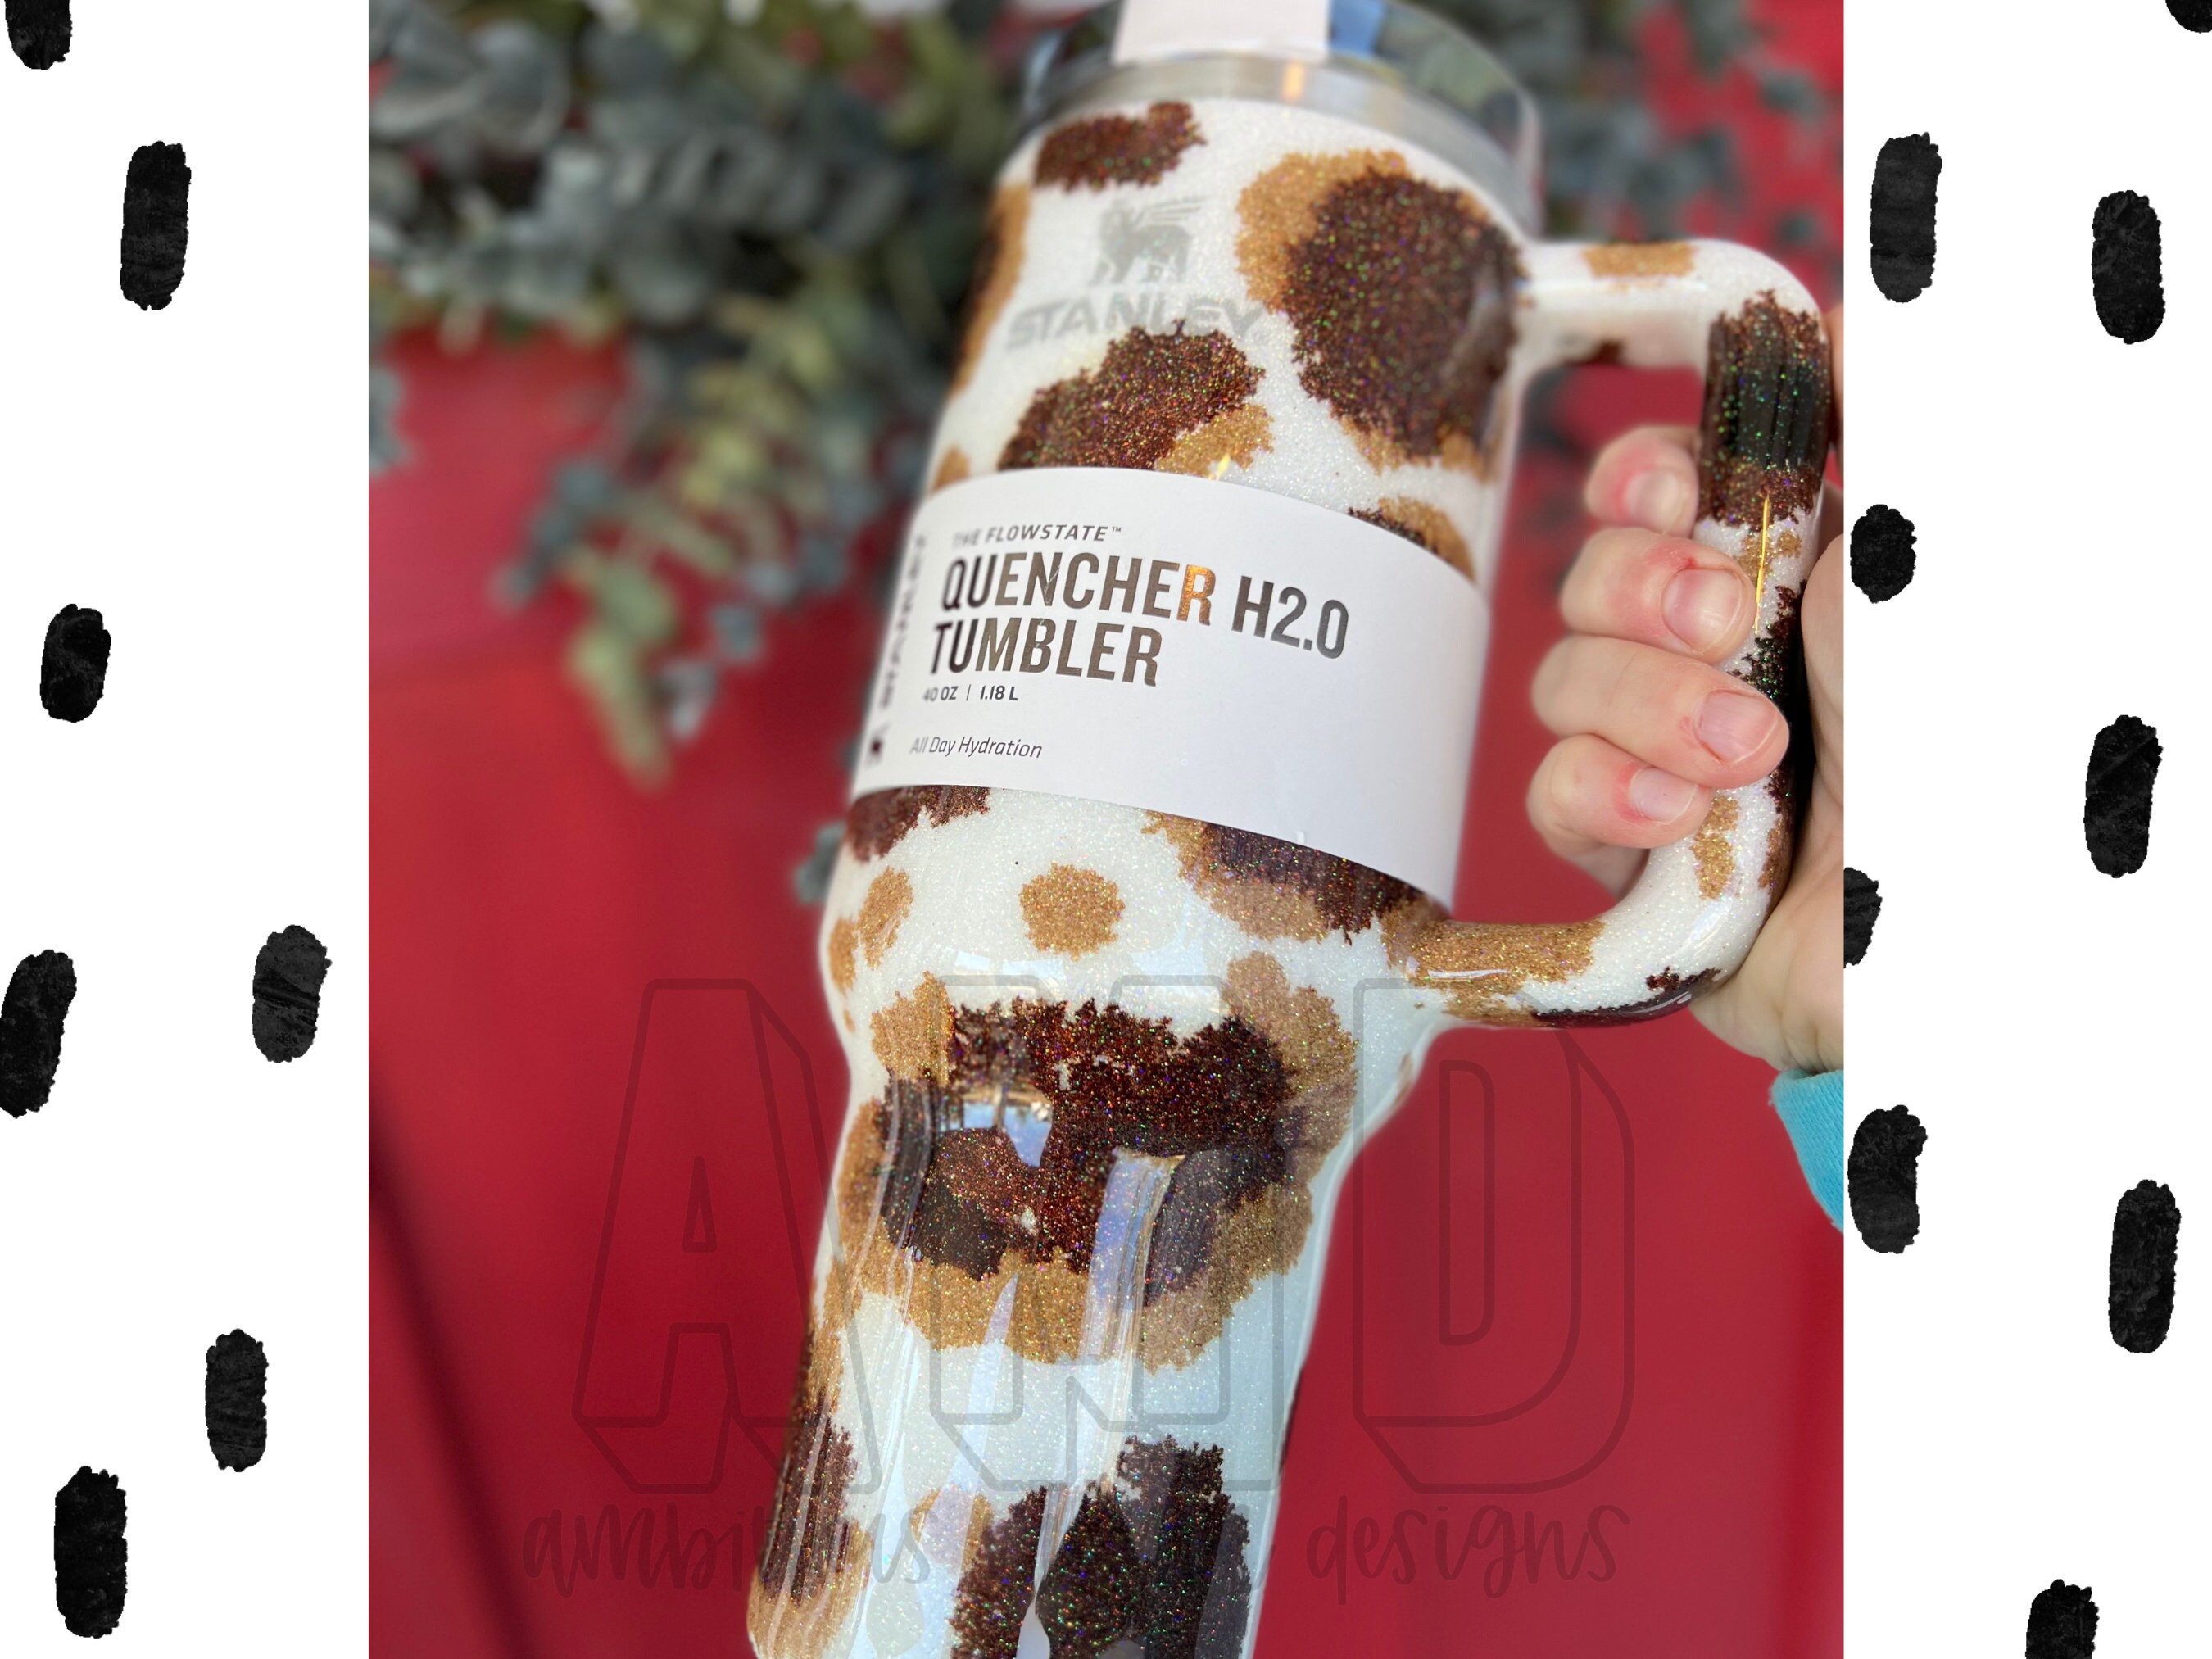 40oz Animal Print V1 Tumbler with Handle - Cowhide, Leopard, Cow Print